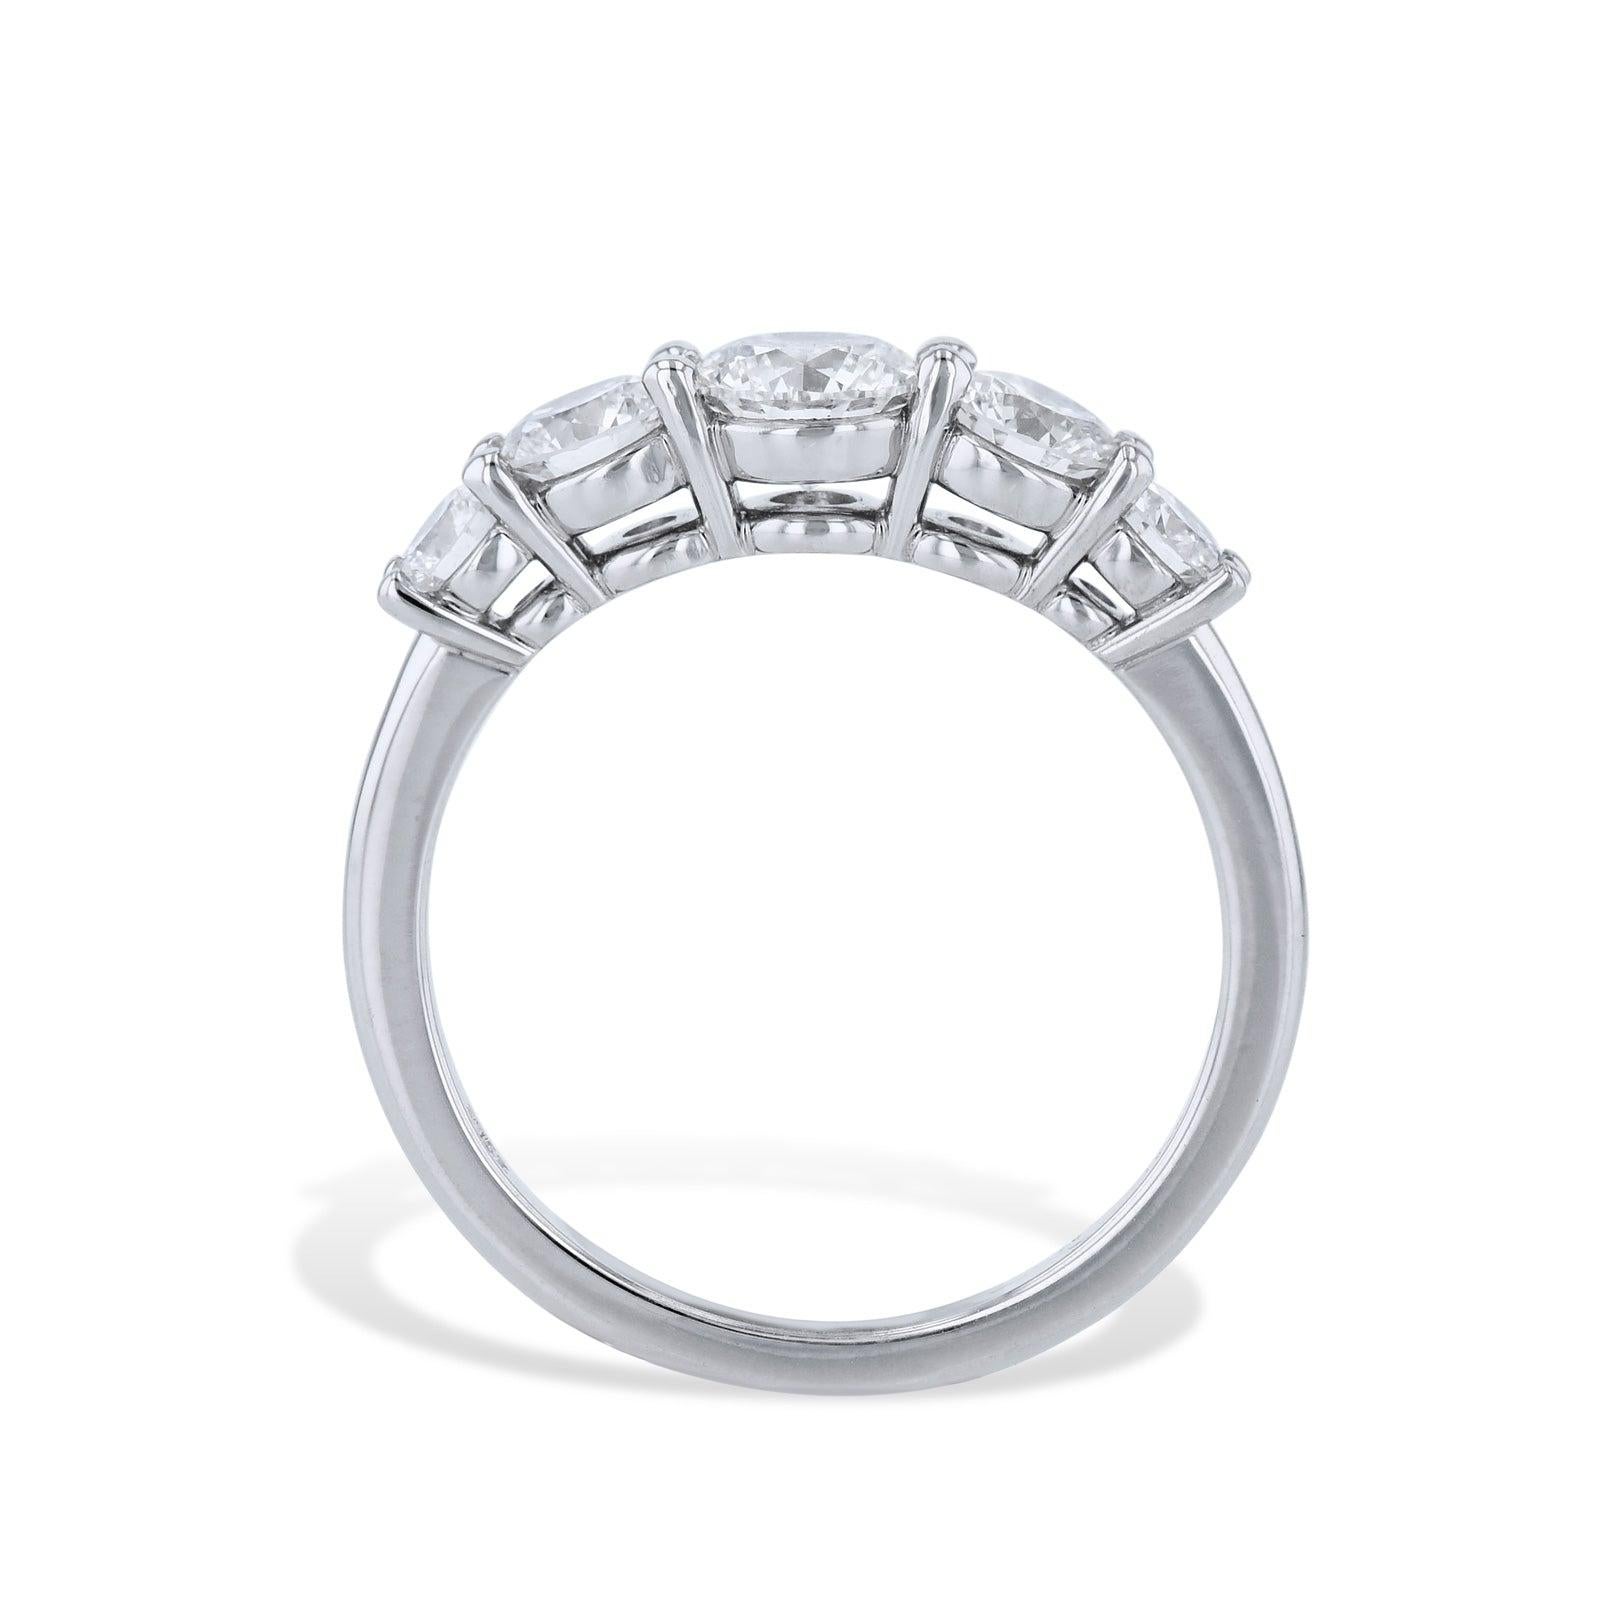 This exquisite 5 Stone Diamond Platinum Band Ring displays a captivating array of Diamonds. It features a center round brilliant cut diamond. Handcrafted with precision by H&H Jewels.
5 Stone Diamond Platinum Band Ring
Size 6
Platinum
Diamonds: